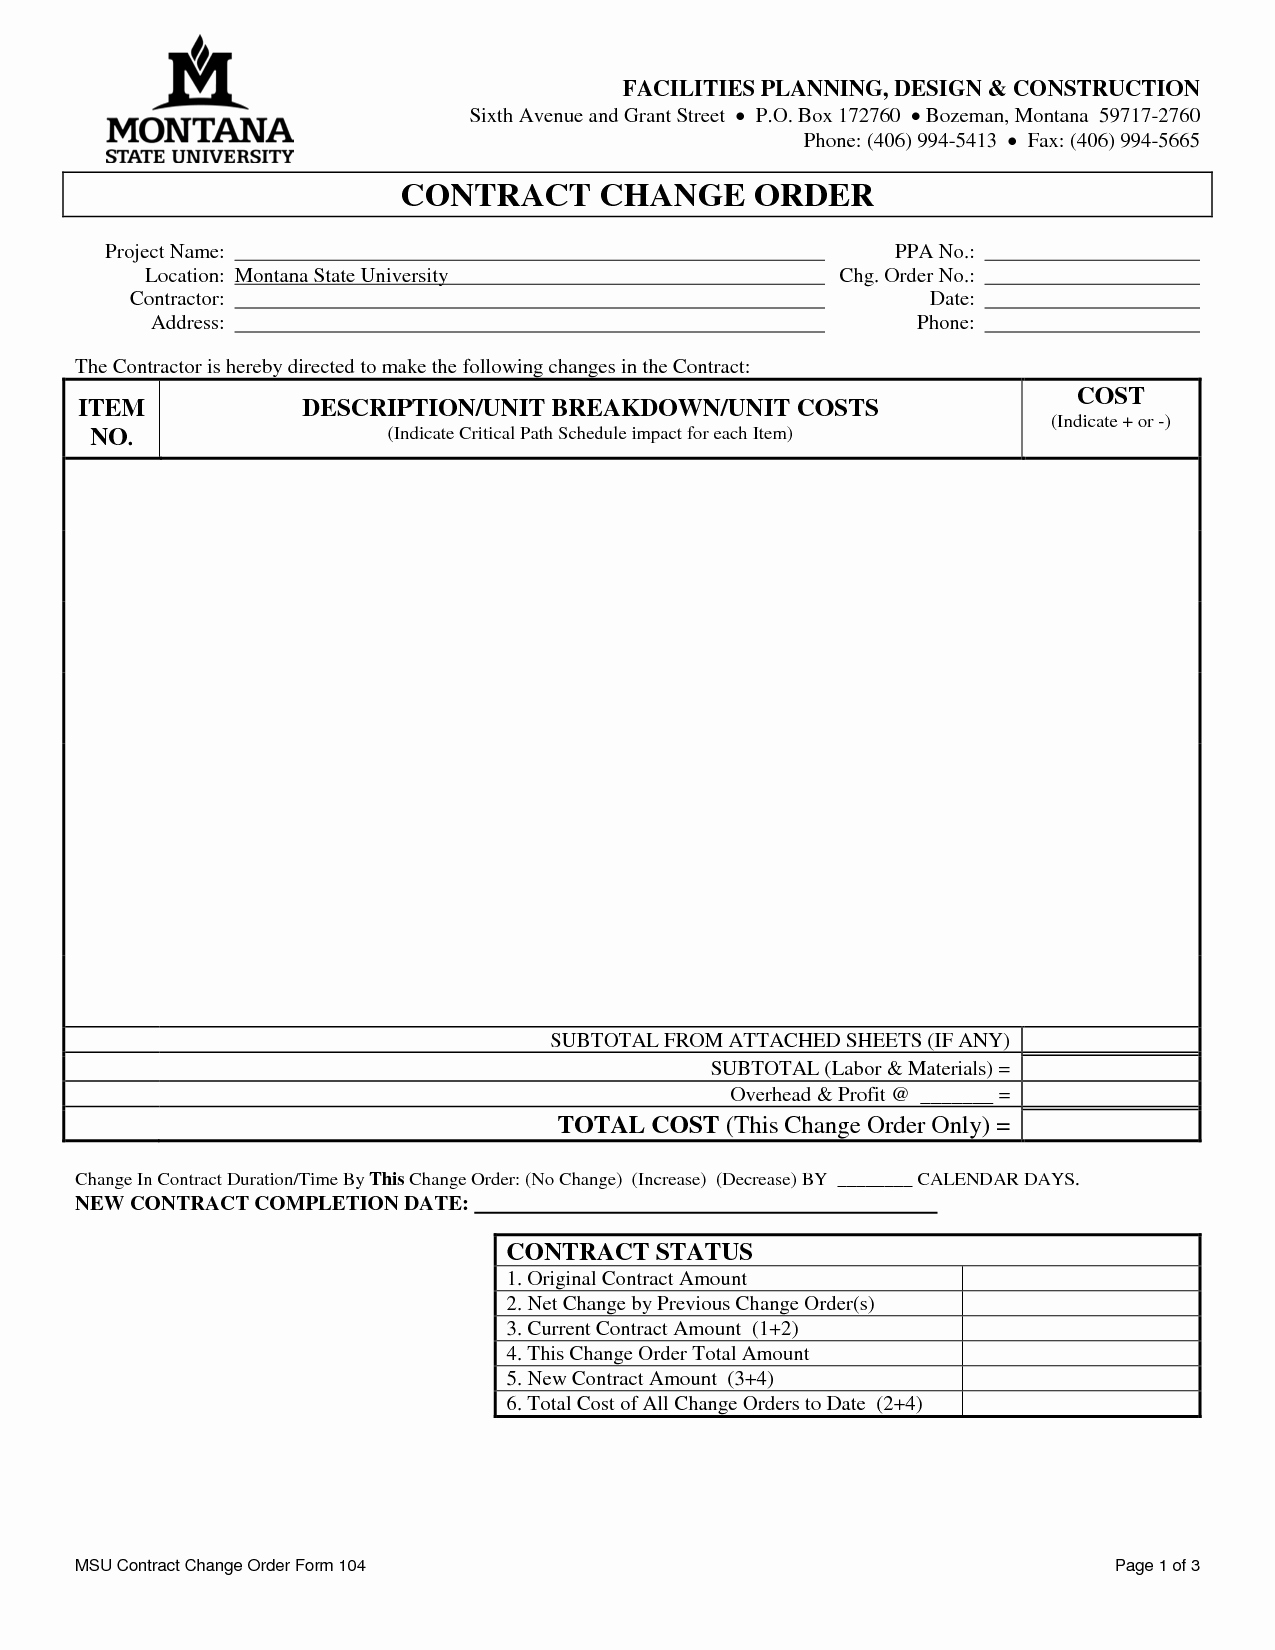 Change order Template Excel New Free Construction Change order form Pdf by Ckm